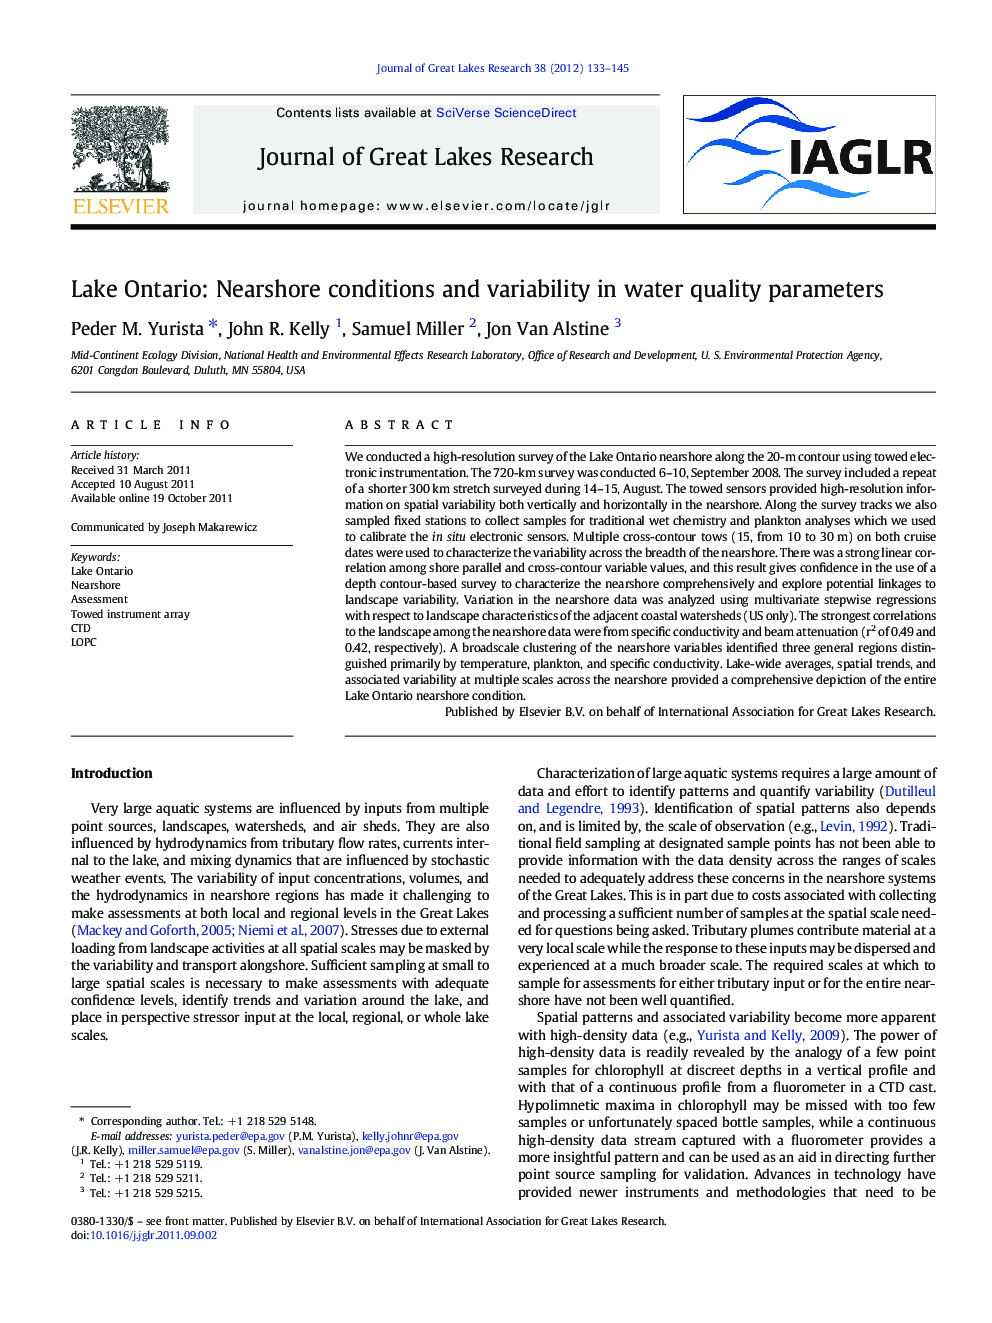 Lake Ontario: Nearshore conditions and variability in water quality parameters